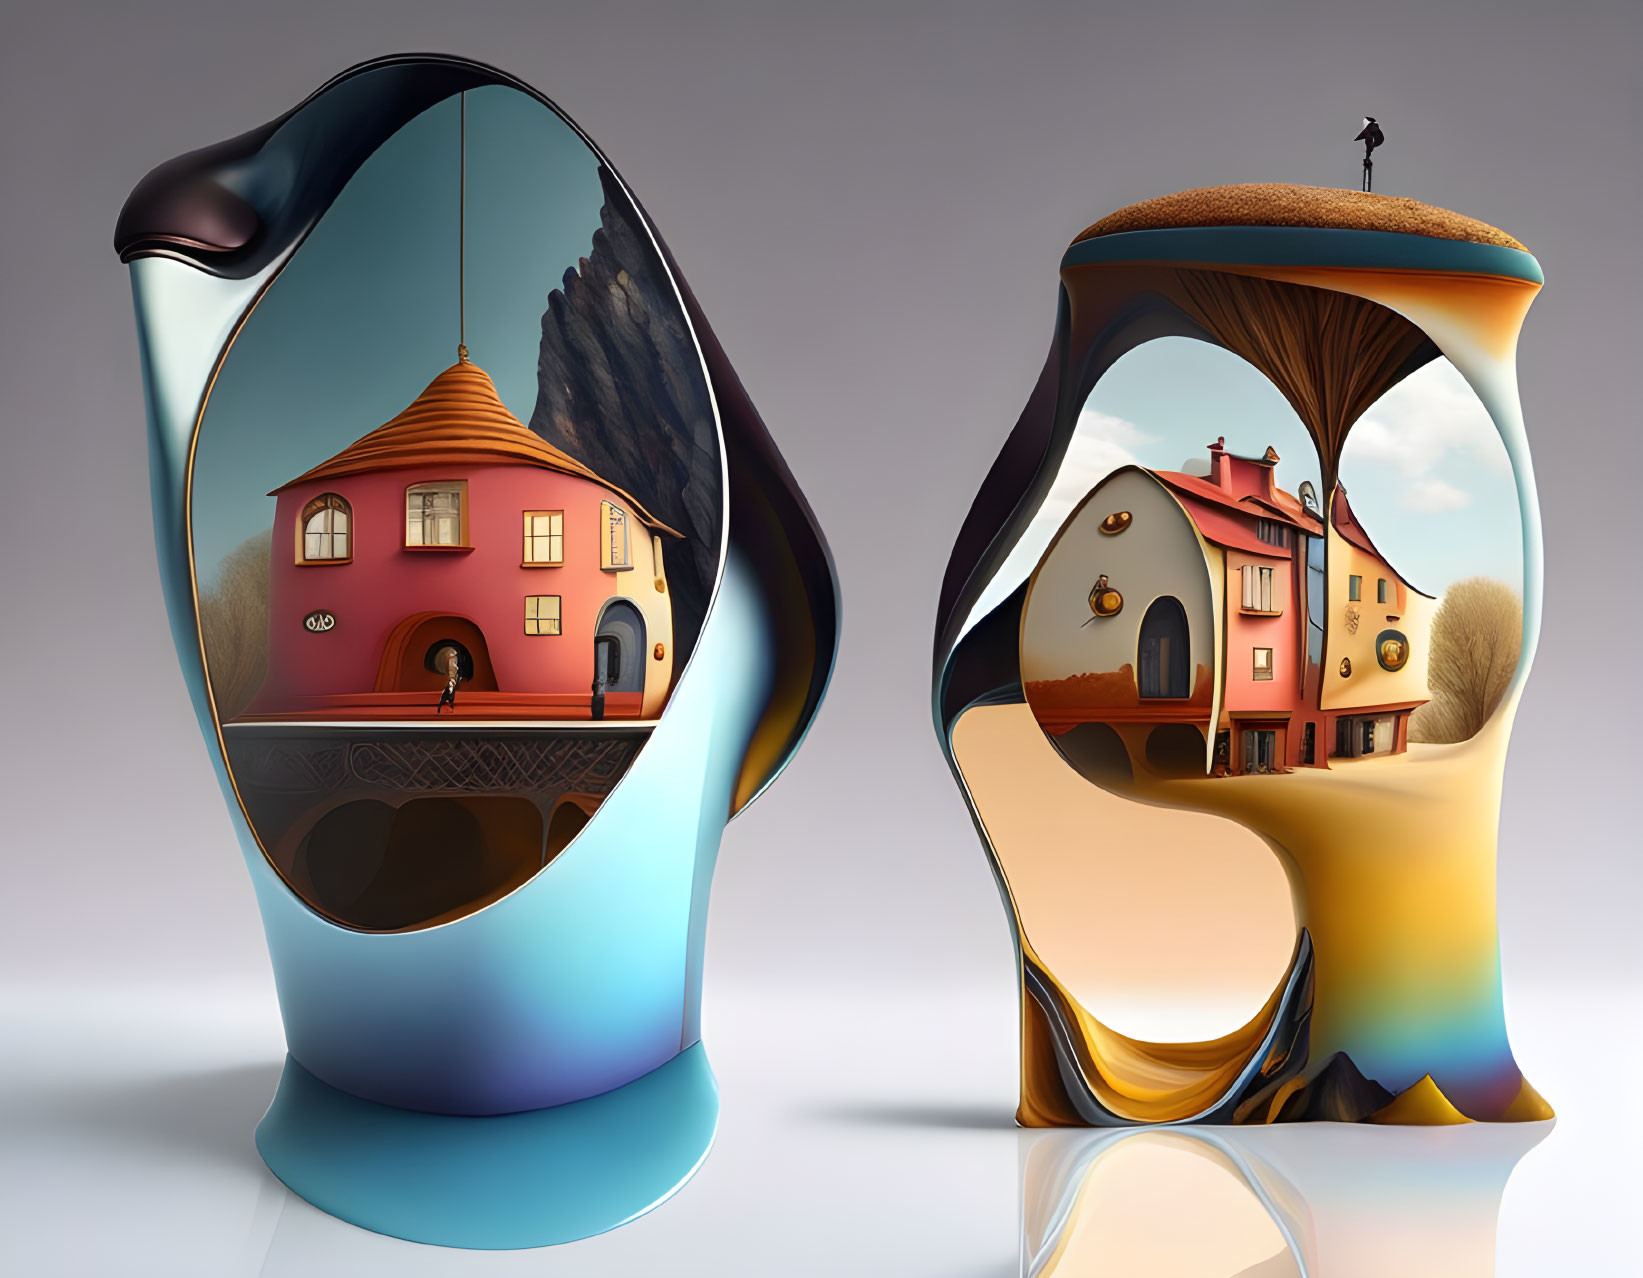 Surreal landscape sculptures: hourglass shape, whimsical houses, person on cliff